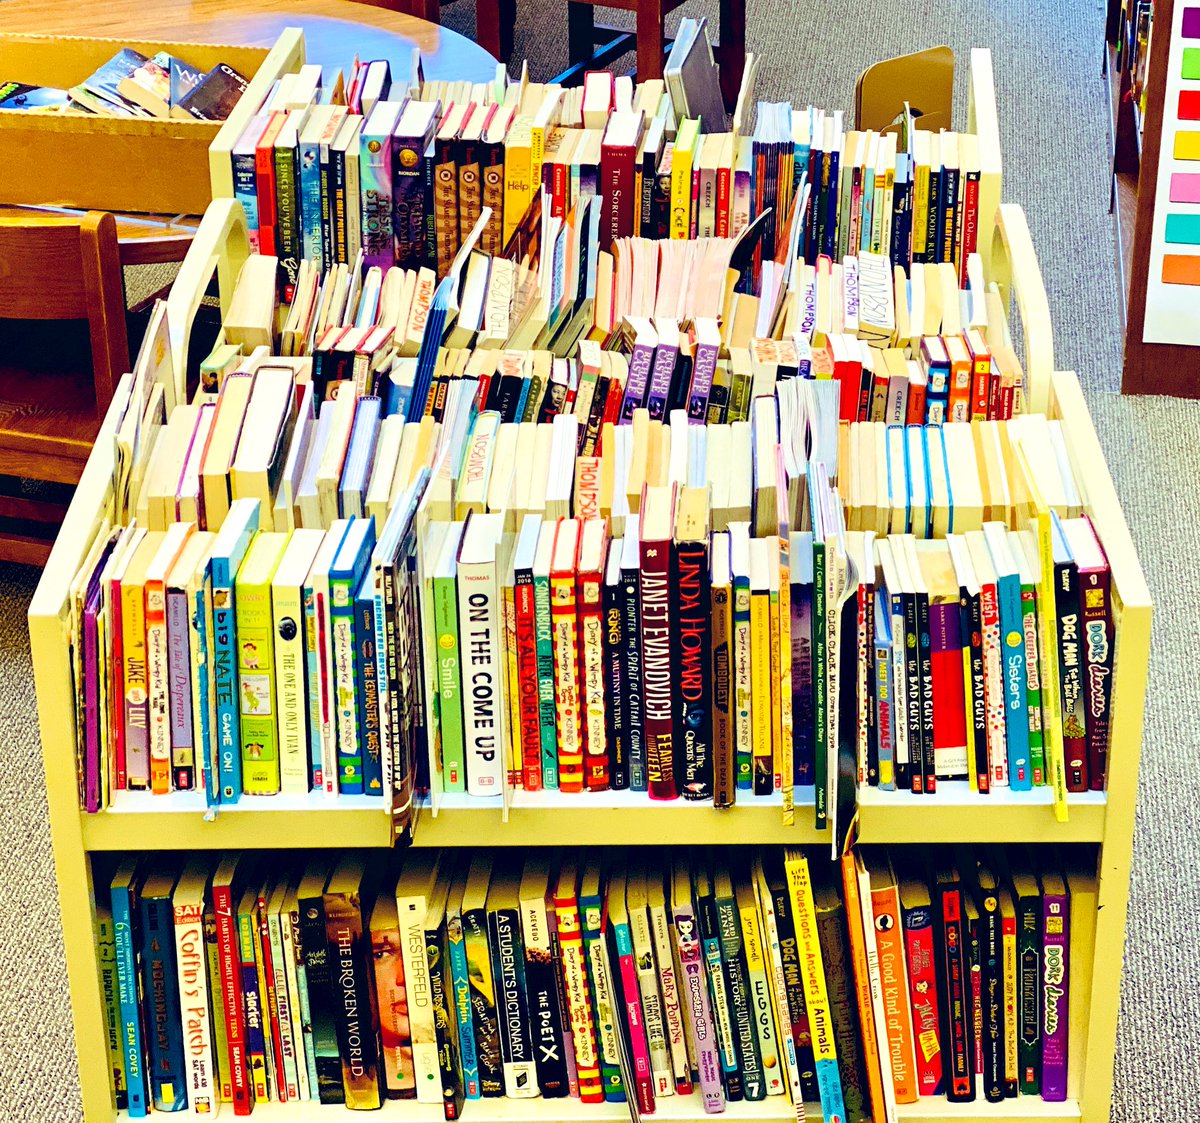 An amazing 1st week haul of donated books by TMS students & teachers for the #africanlibraryproject @AfricanLibraryP               @read_tms @CityofTucker